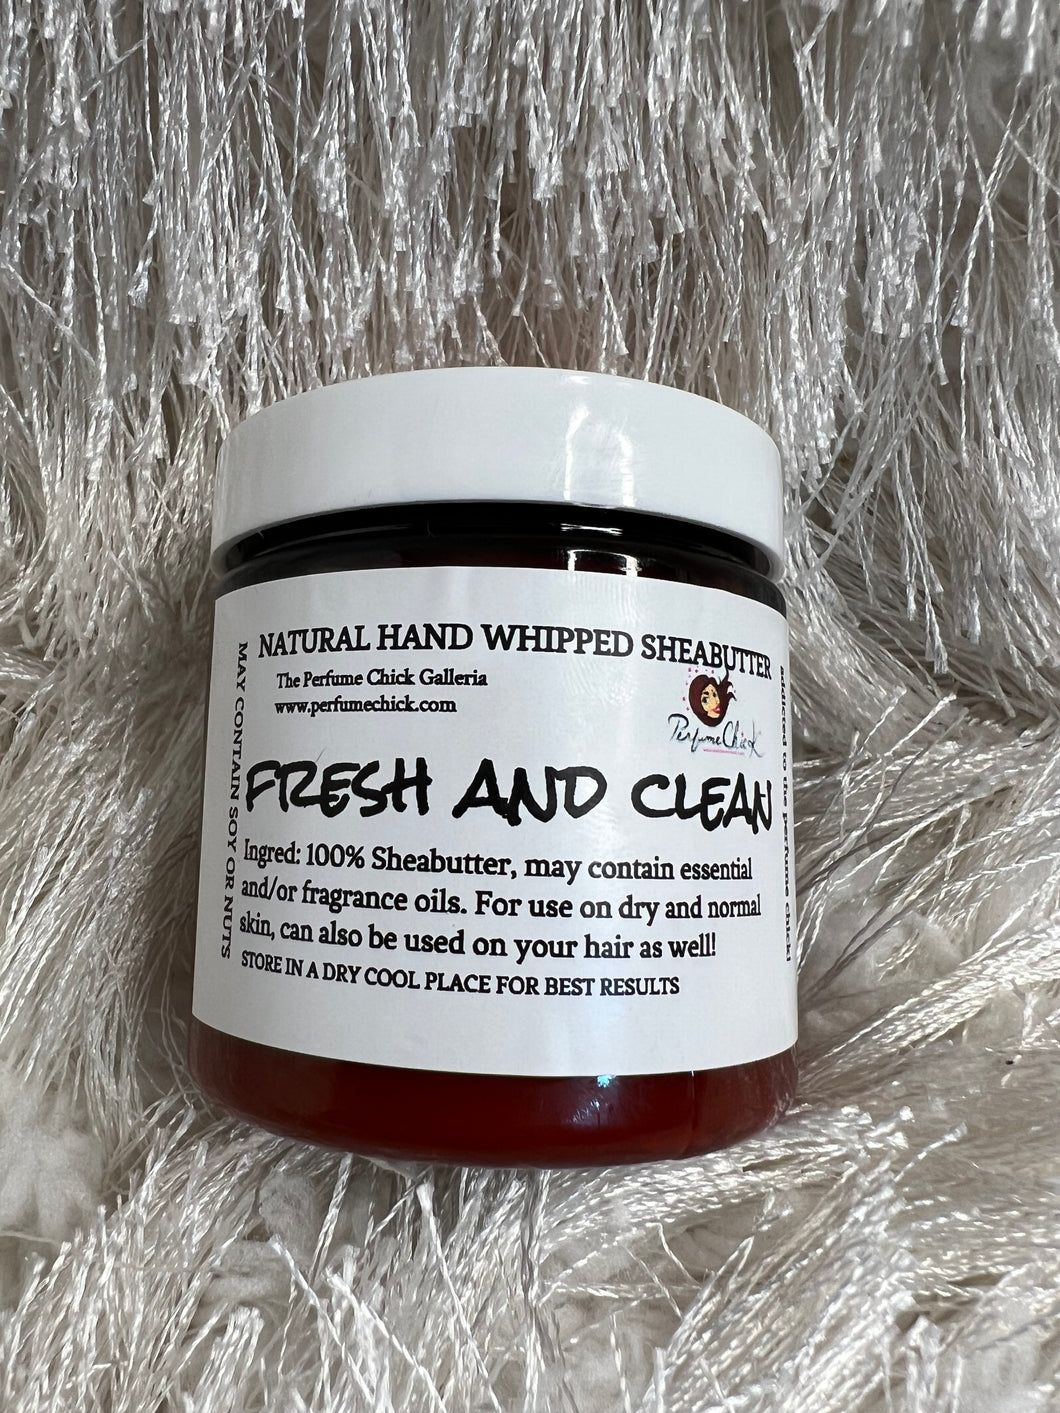 FRESH AND CLEAN SHEA BUTTER